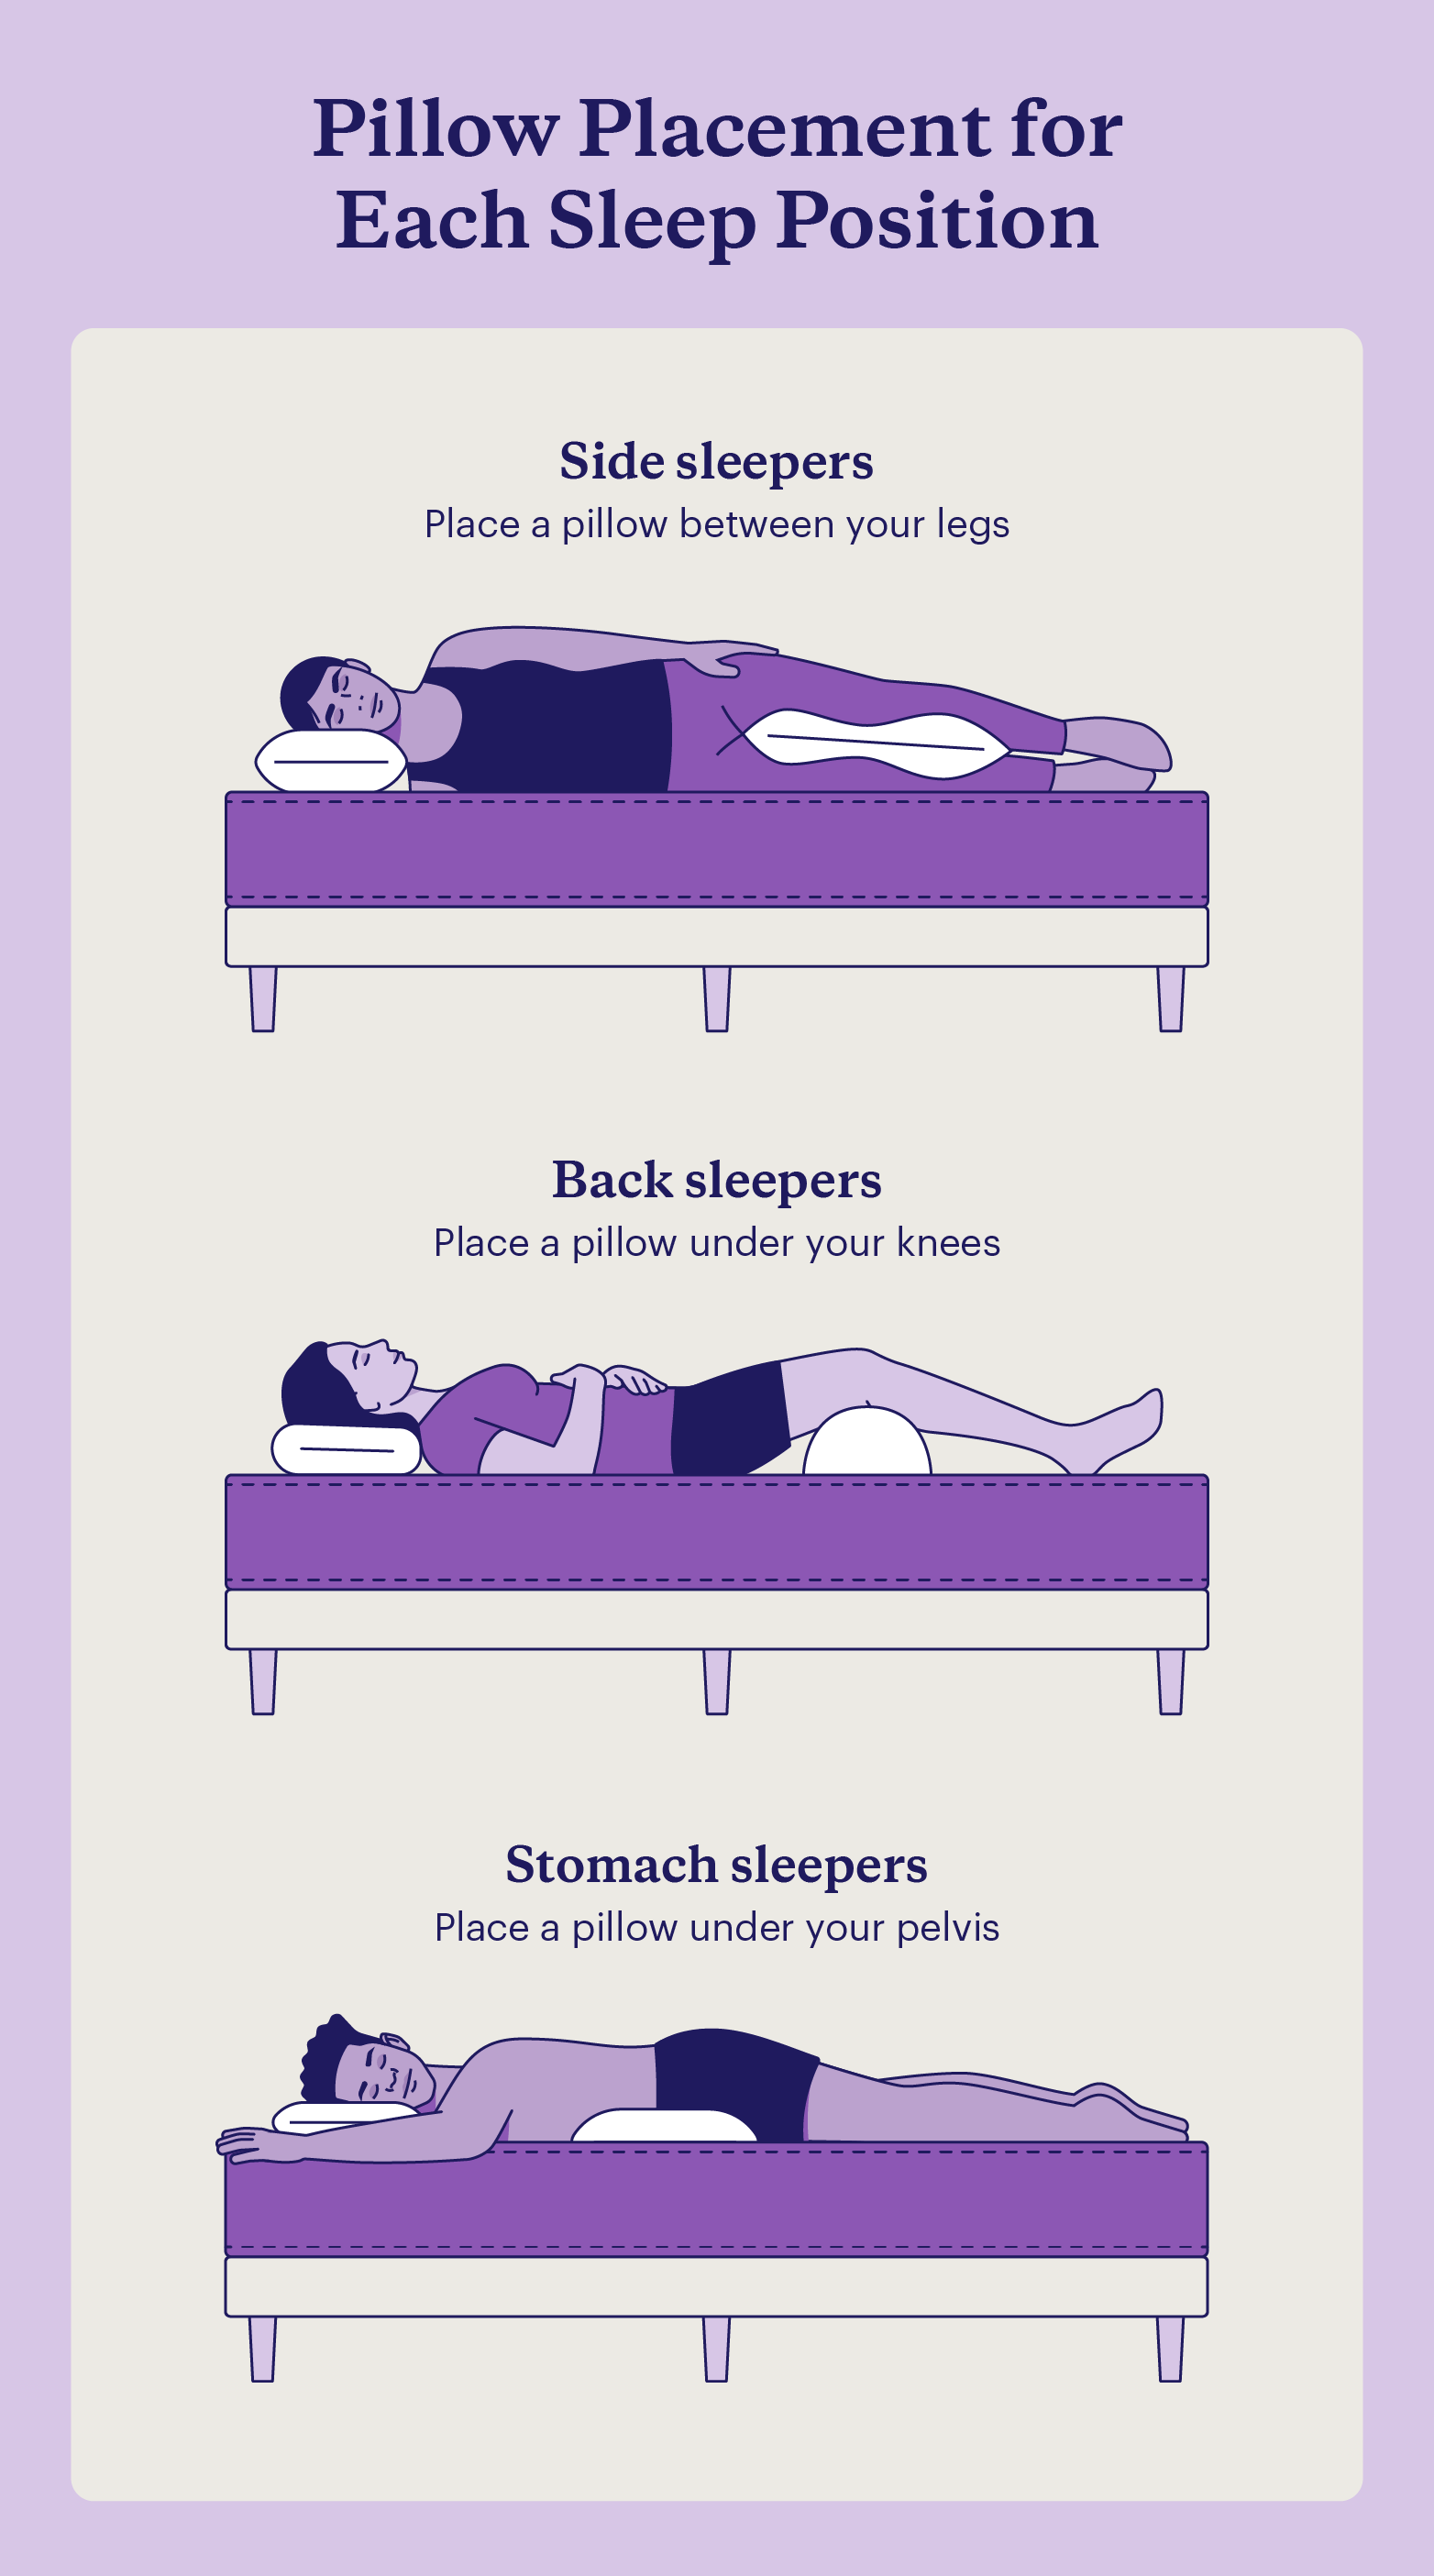 Graphic illustrating recommended pillow placements for each sleep position.